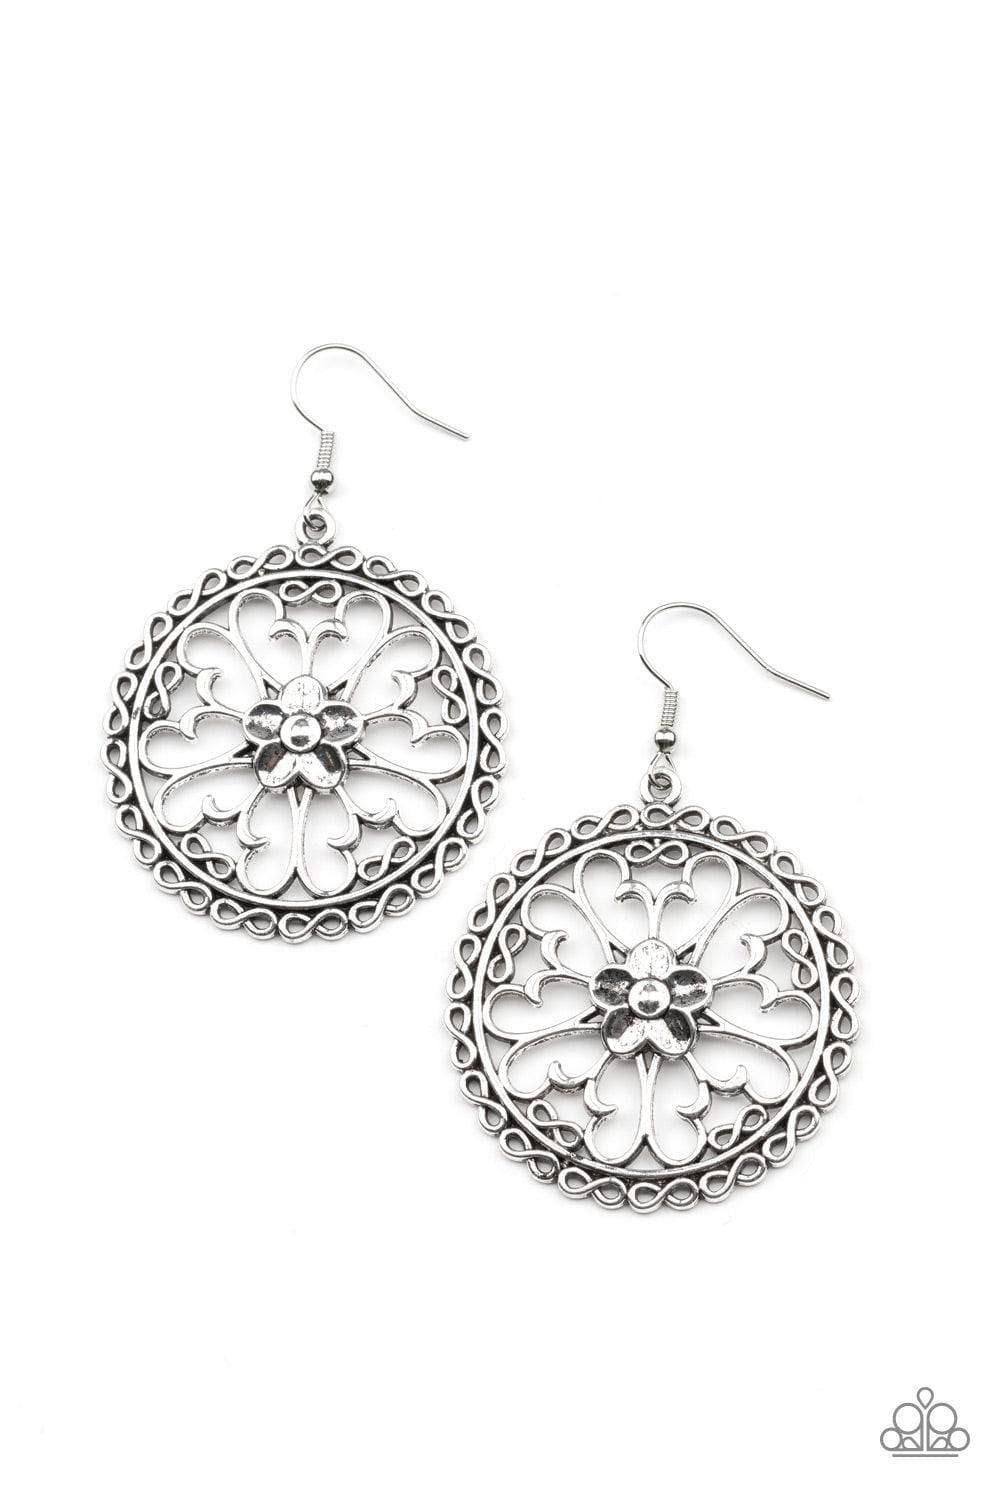 Paparazzi Accessories - Floral Fortunes - Silver Earrings - Bling by JessieK